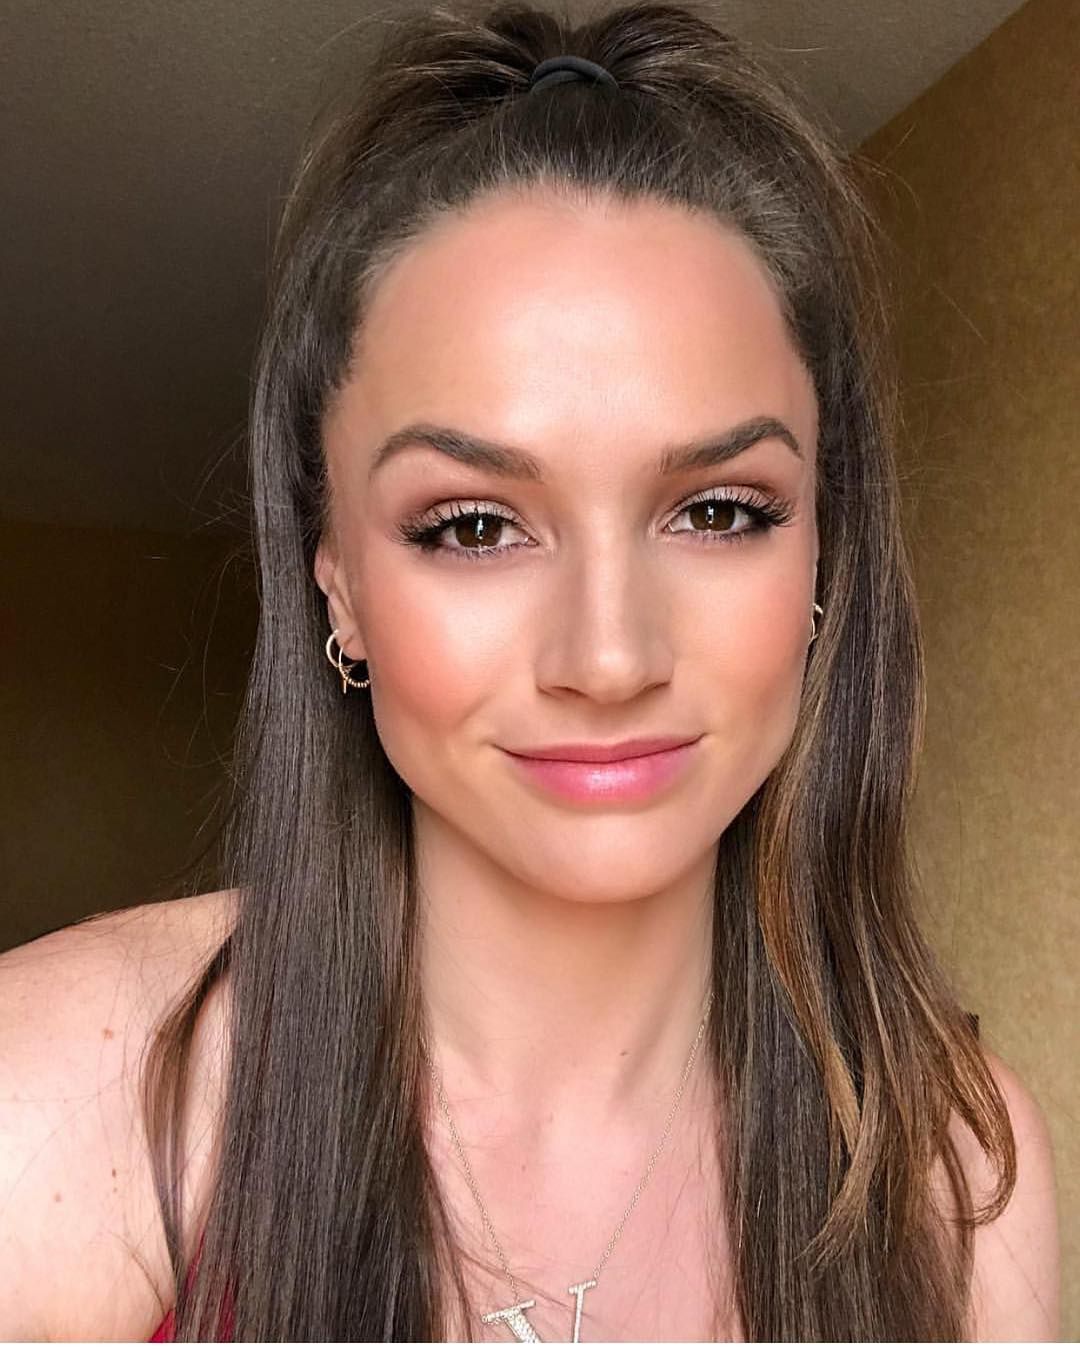 david auke recommends tori black without makeup pic